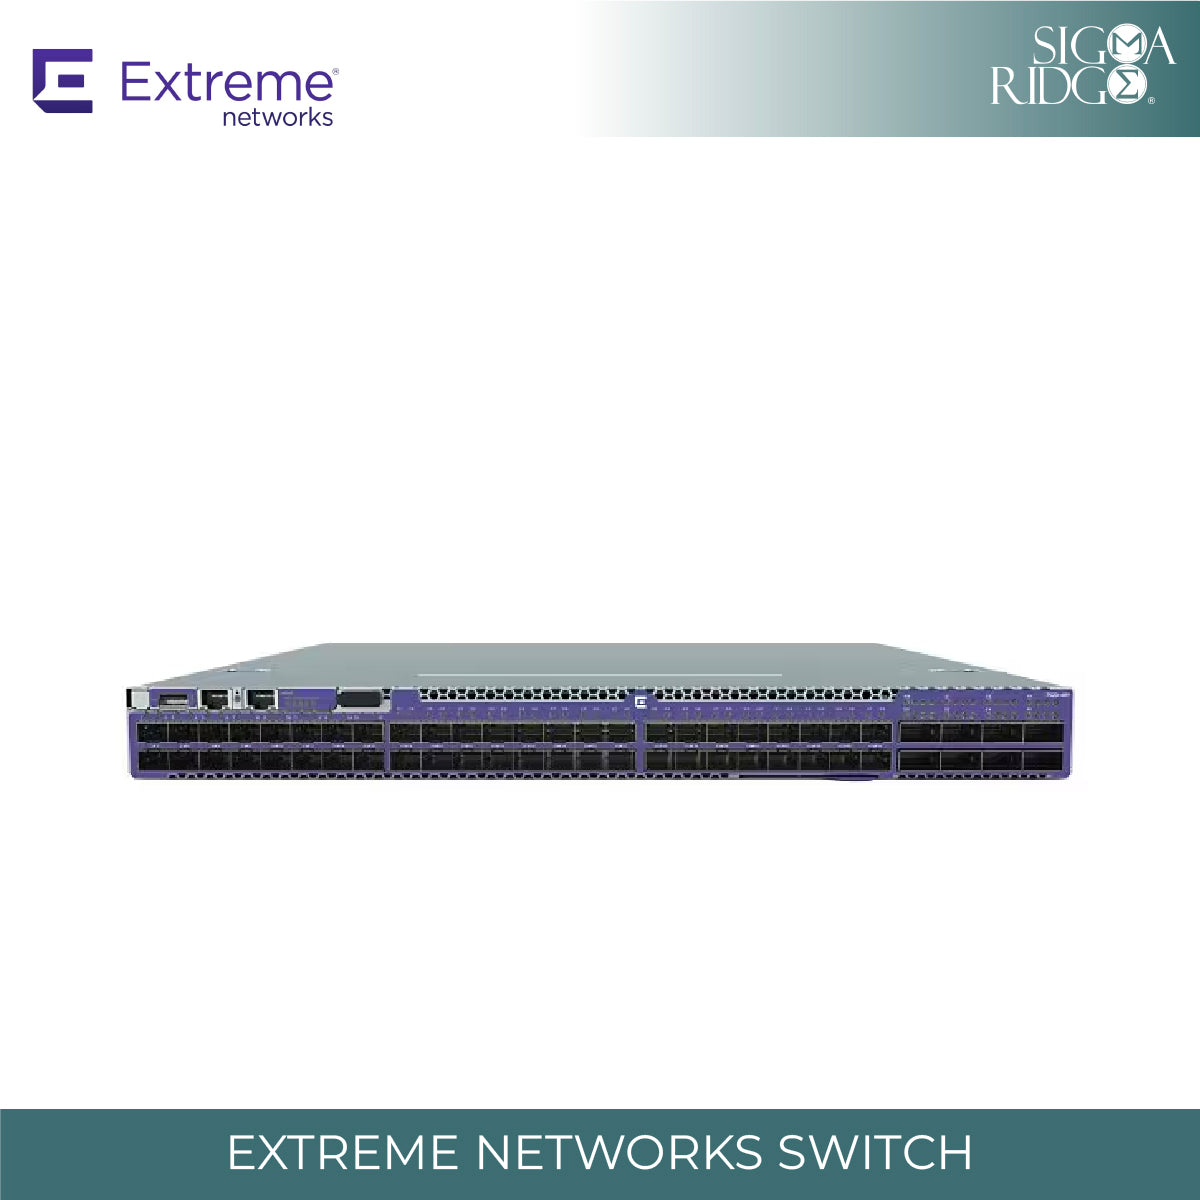 Copy 01 - of Extreme Networks 7520-48Y Ethernet Switch with Back to Front Airflow